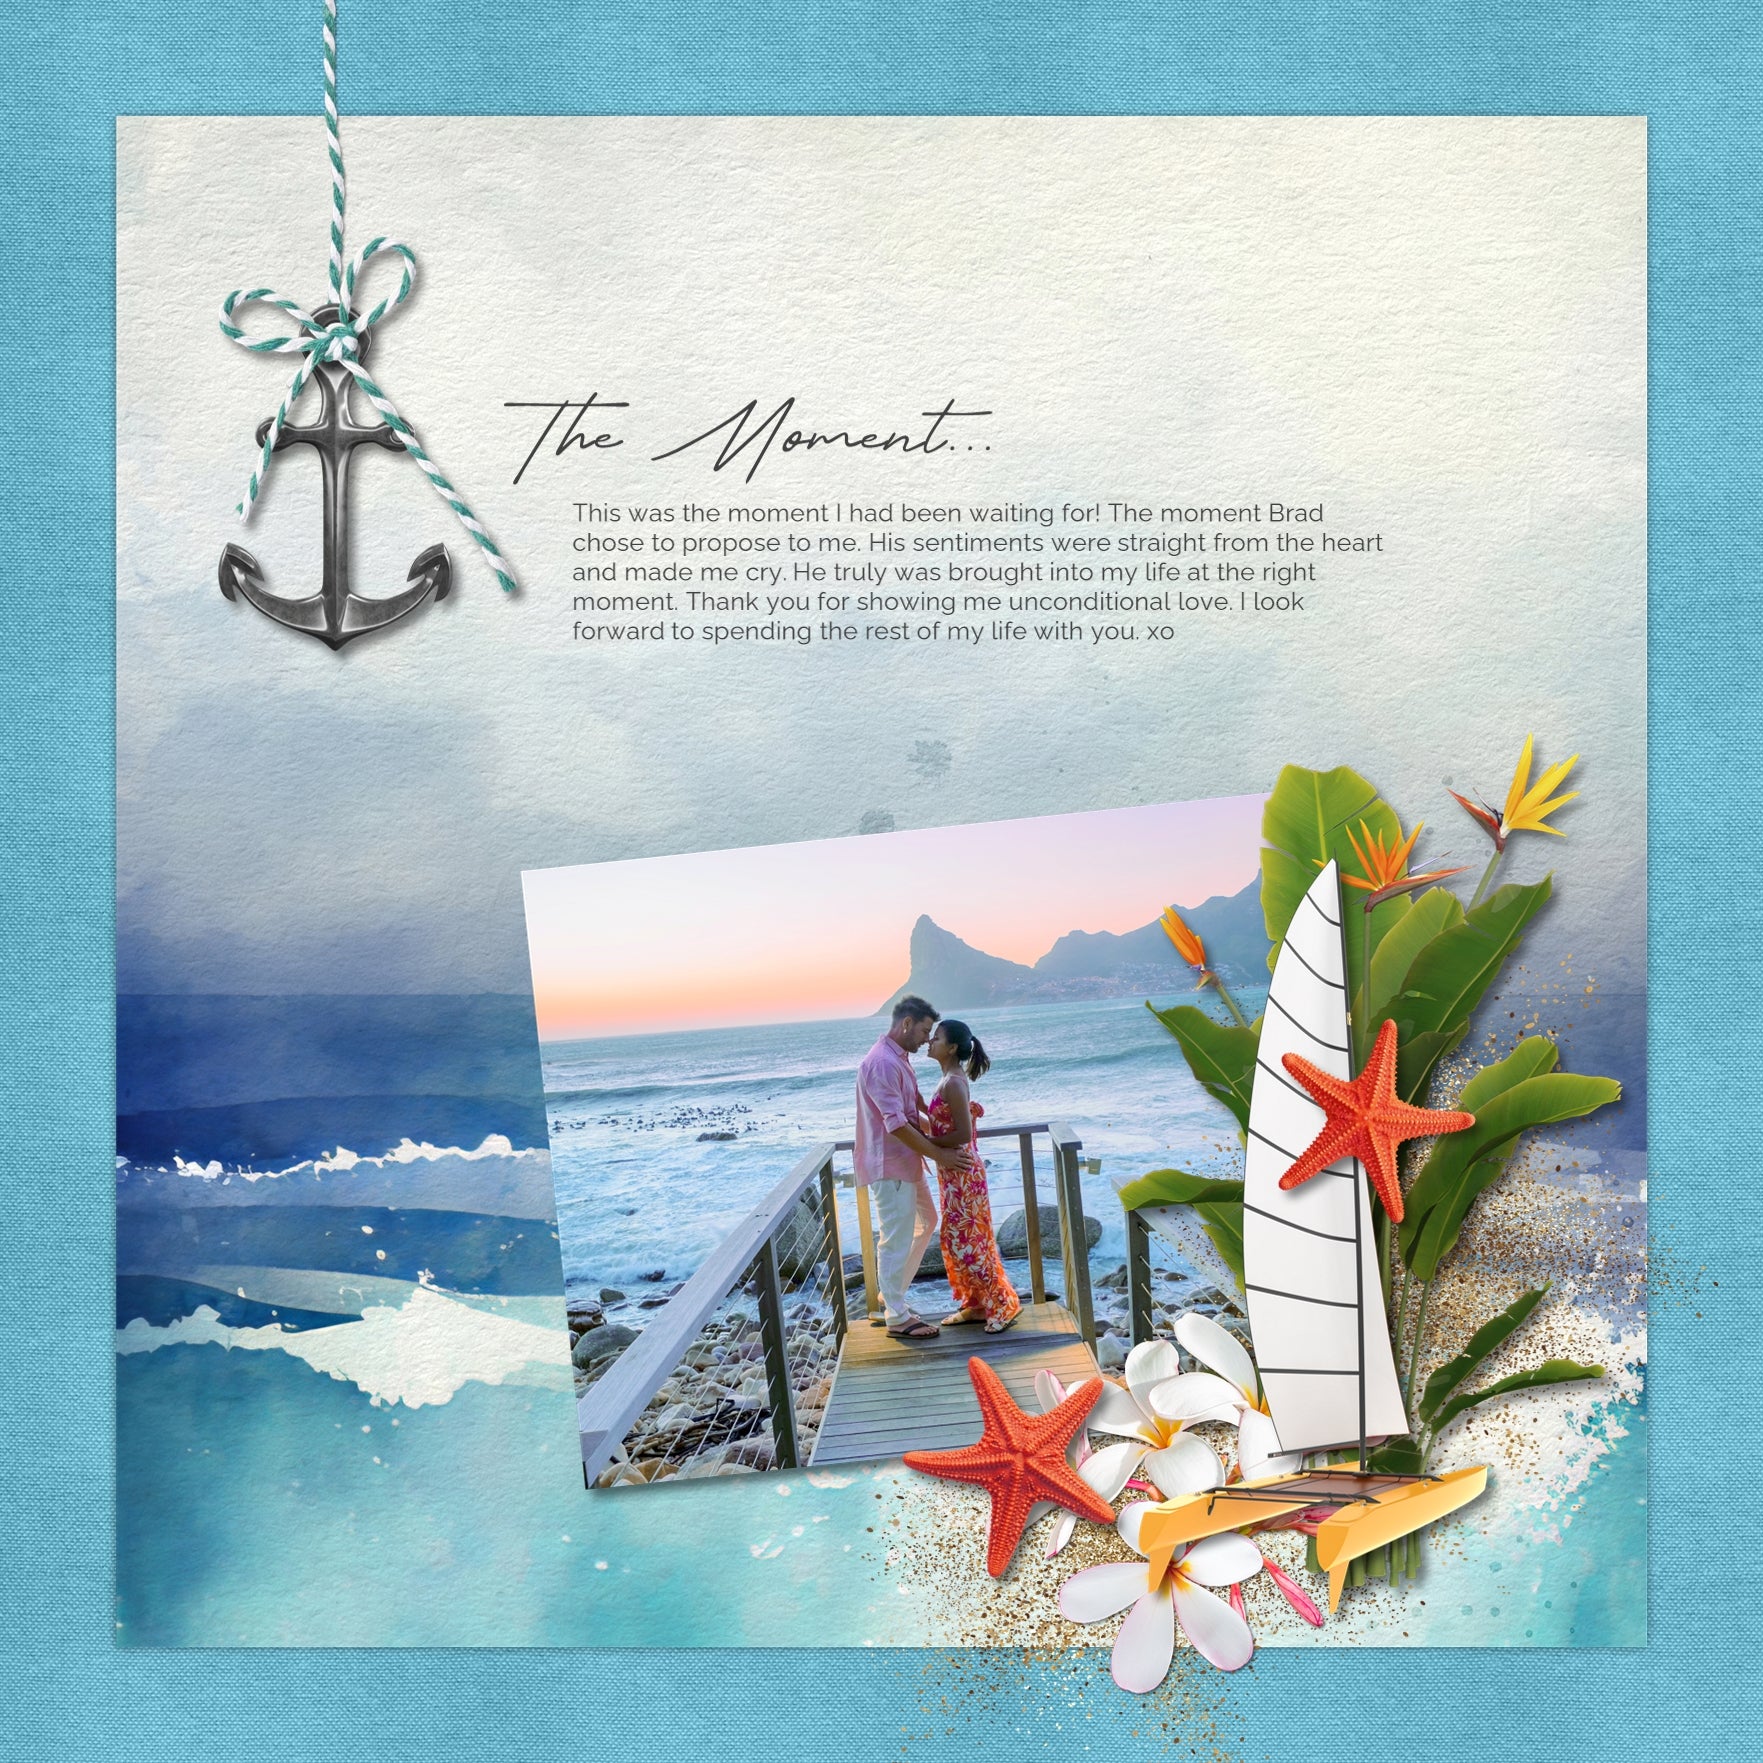 Highlight your tropical vacation and cruise ship excursion memories with these beautiful realistic embellishments by Lucky Girl Creative. Great for holidays to Hawaii, the Caribbean, Florida, California, cruise ship adventures, and beach vacations.